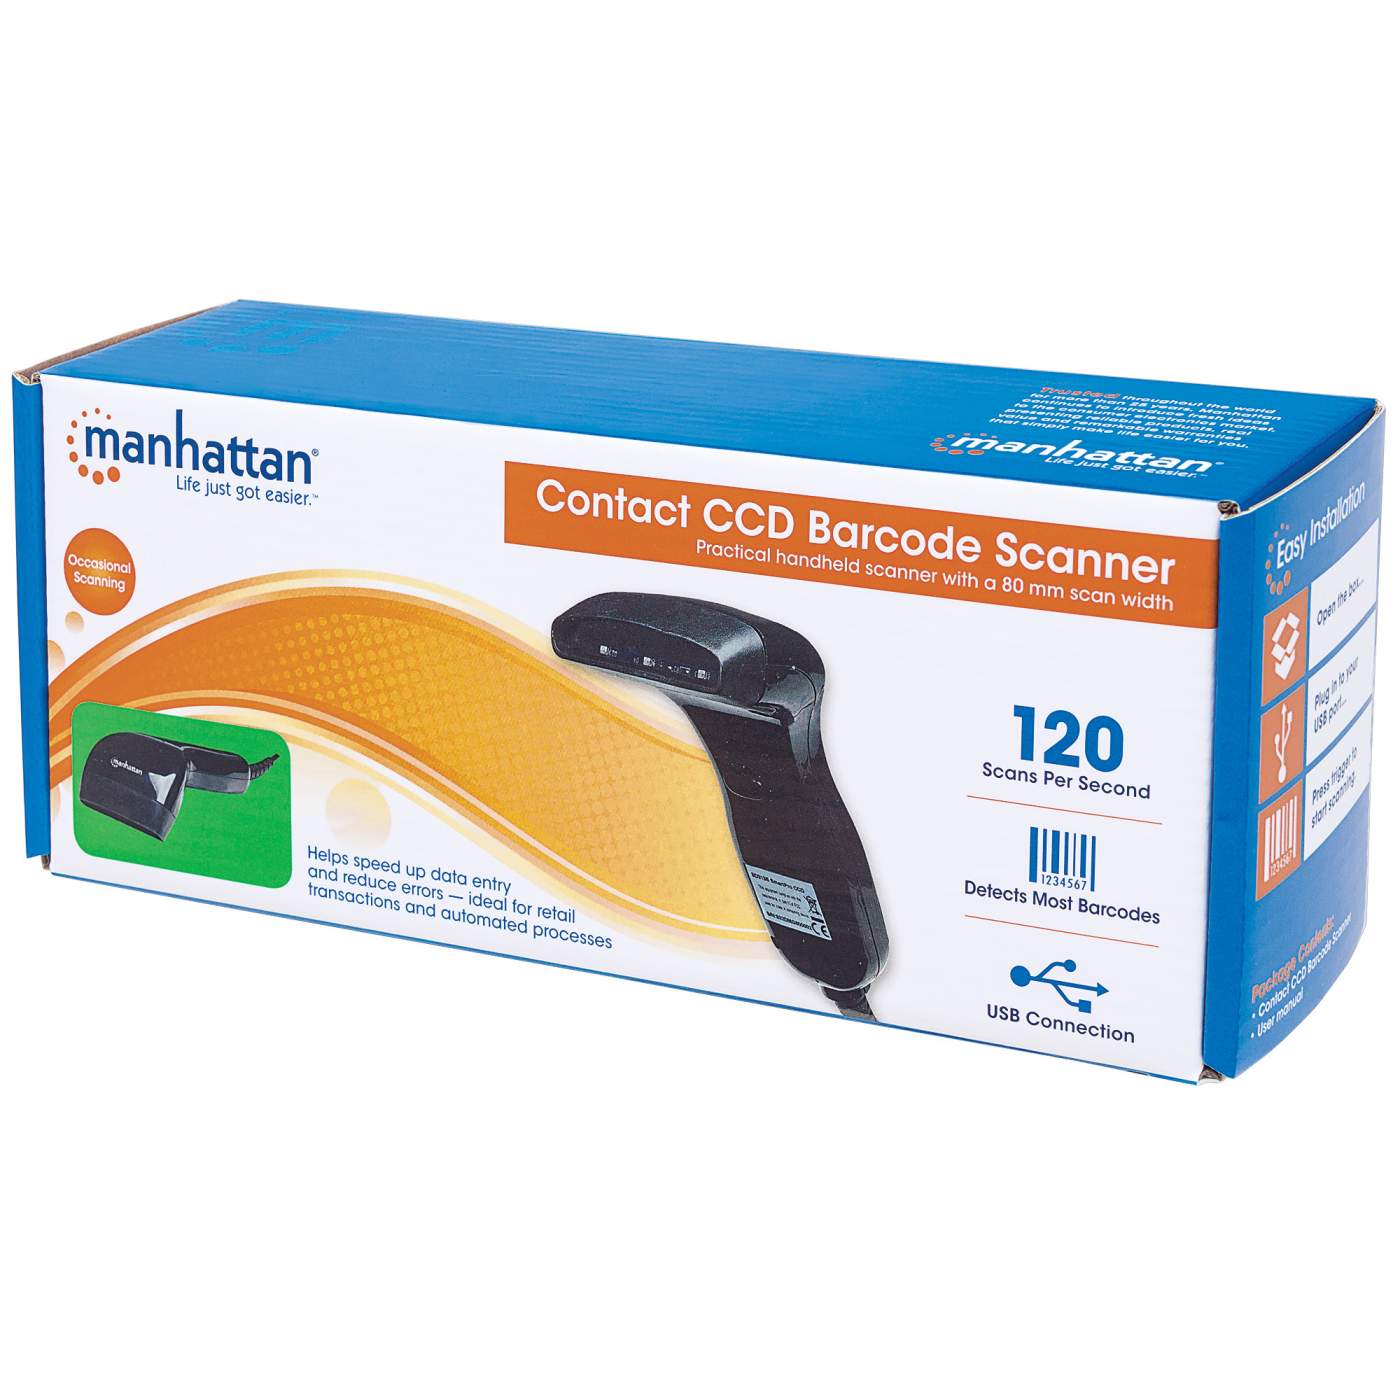 Contact CCD Barcode Scanner Packaging Image 2